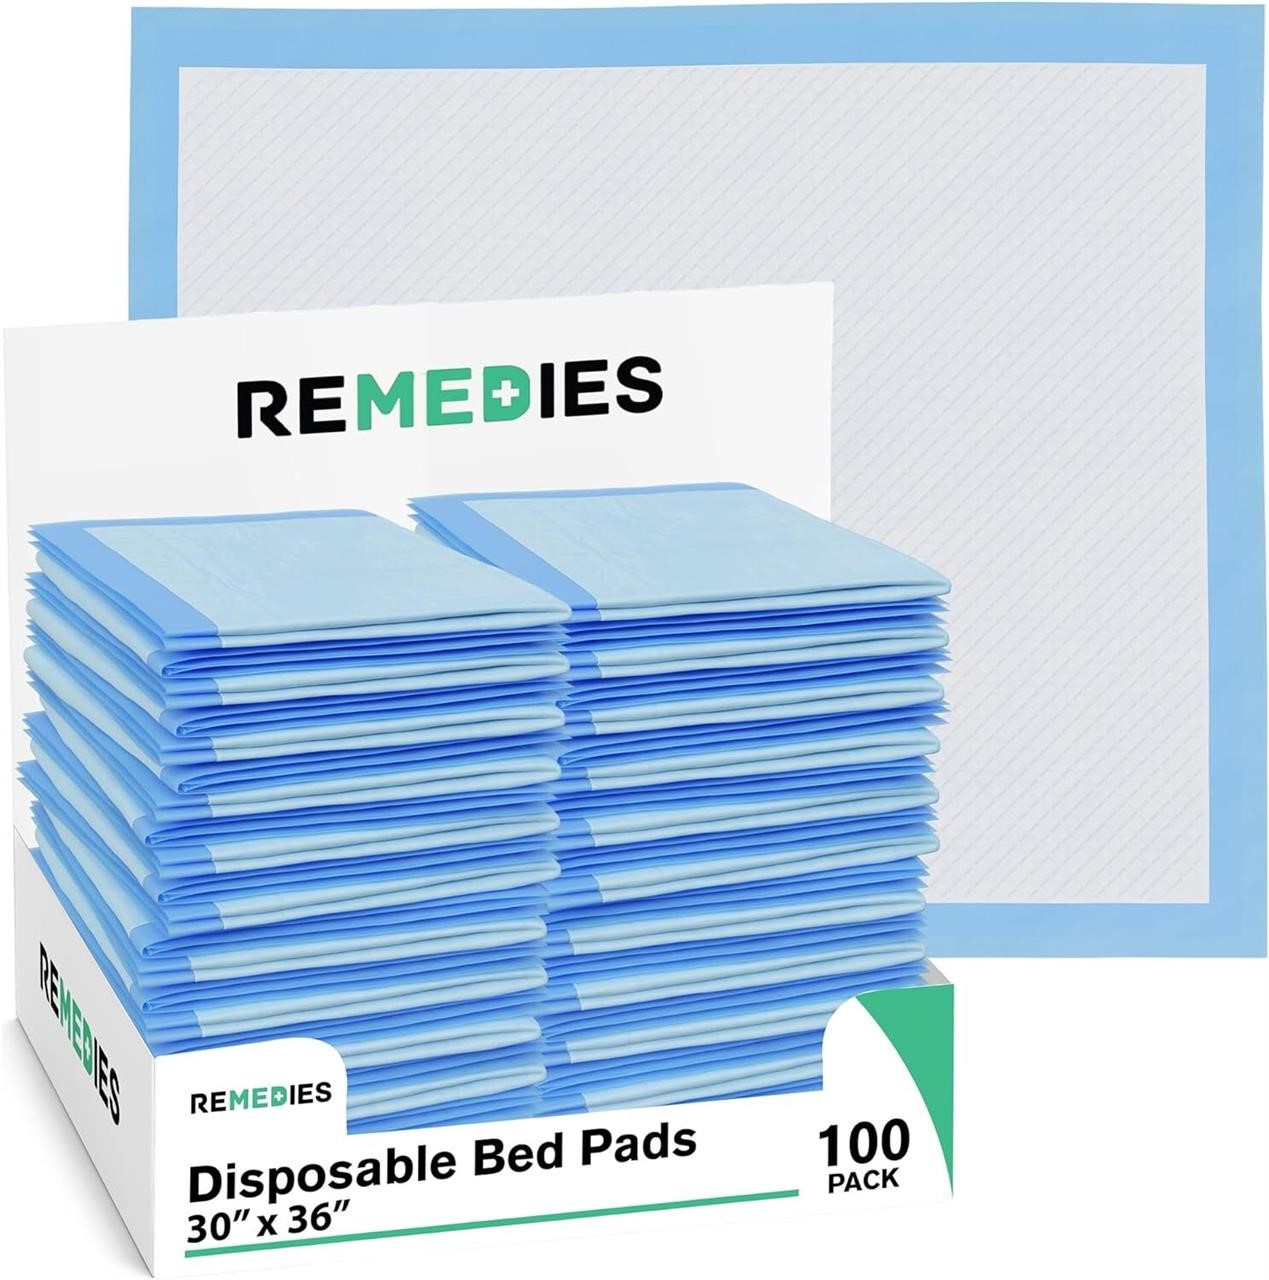 Remedies 30x36 Disposable Bed Pads 100Ct